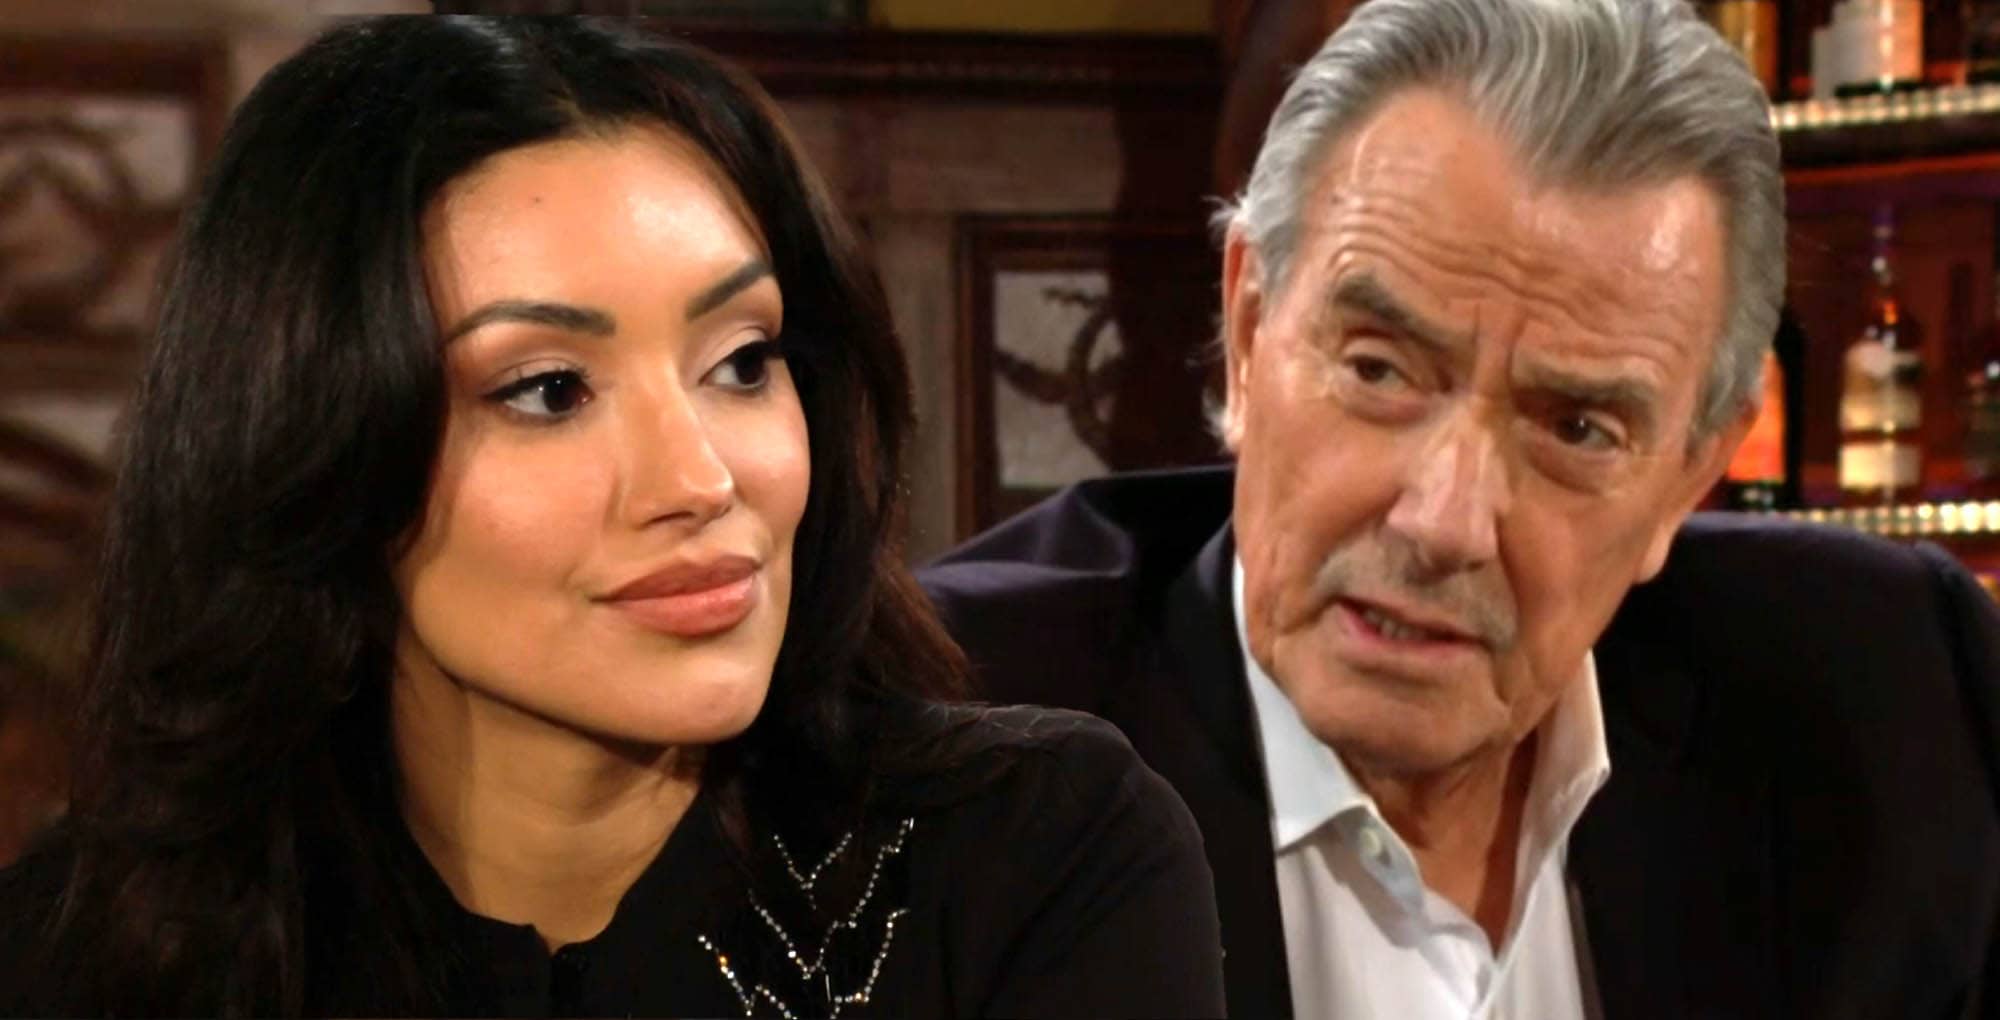 Victor Teams Up with Audra in The Young and the Restless for a Game-Changing Twist